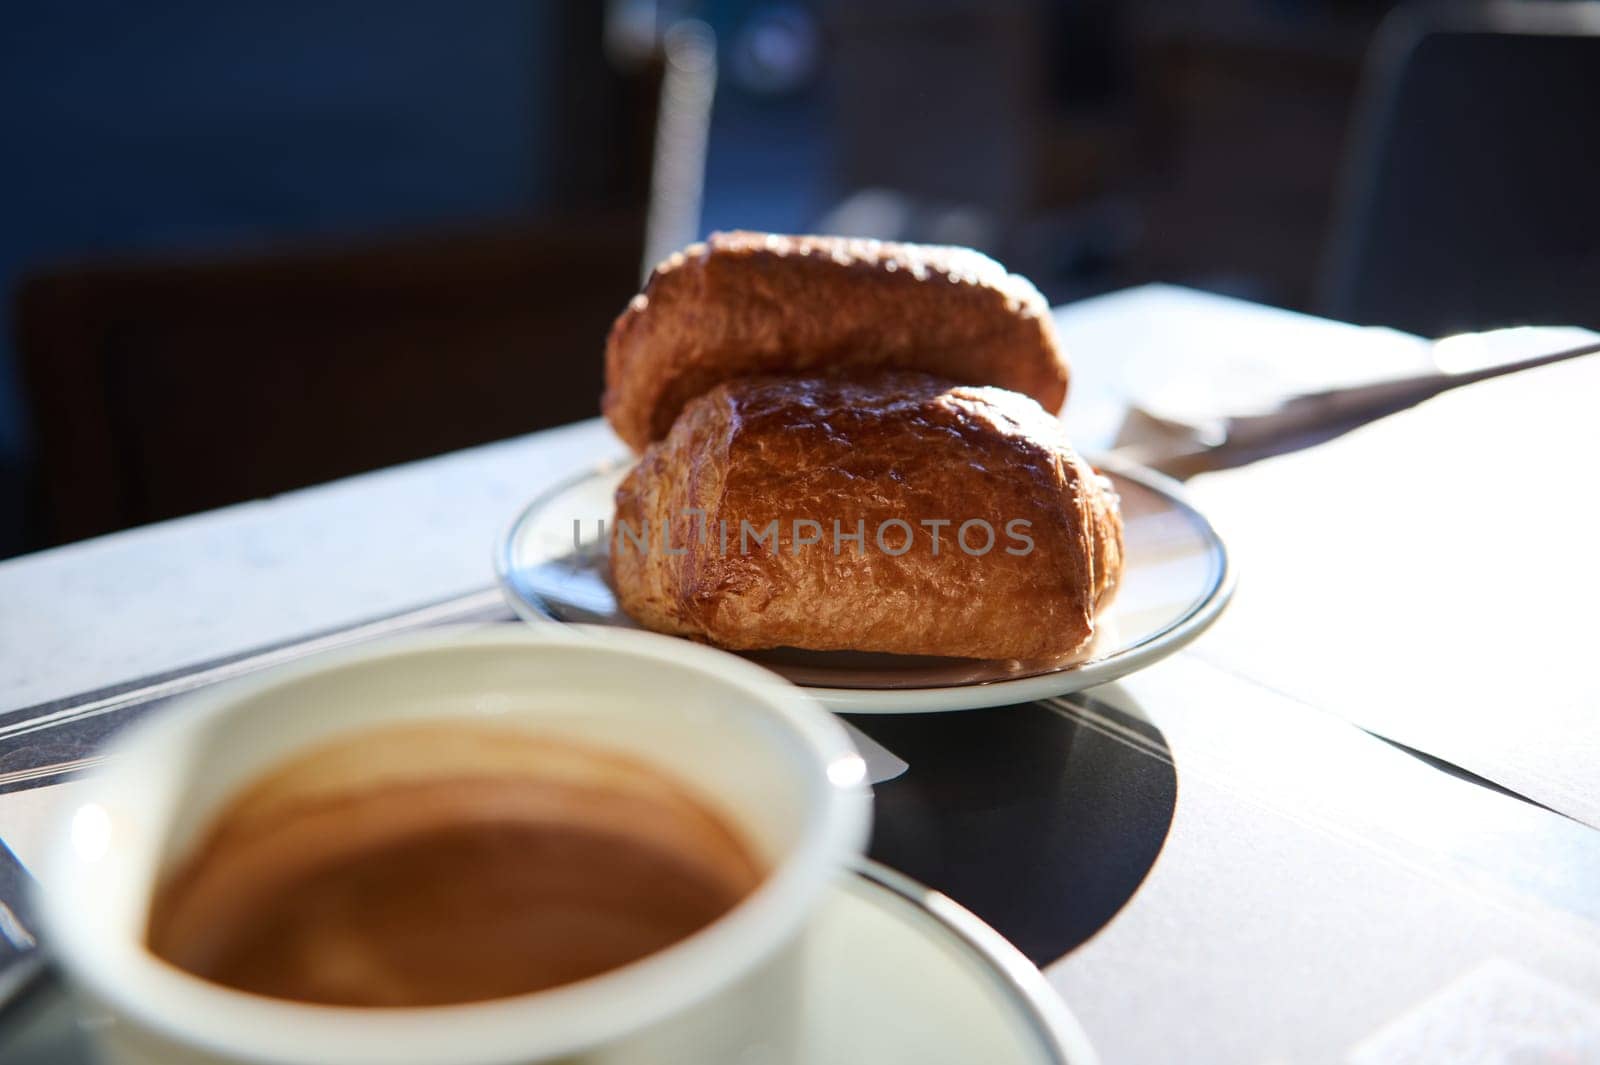 A breakfast in French traditions. Two freshly baked crispy croissants and cup of coffee on the table in a sidewalk cafe. by artgf